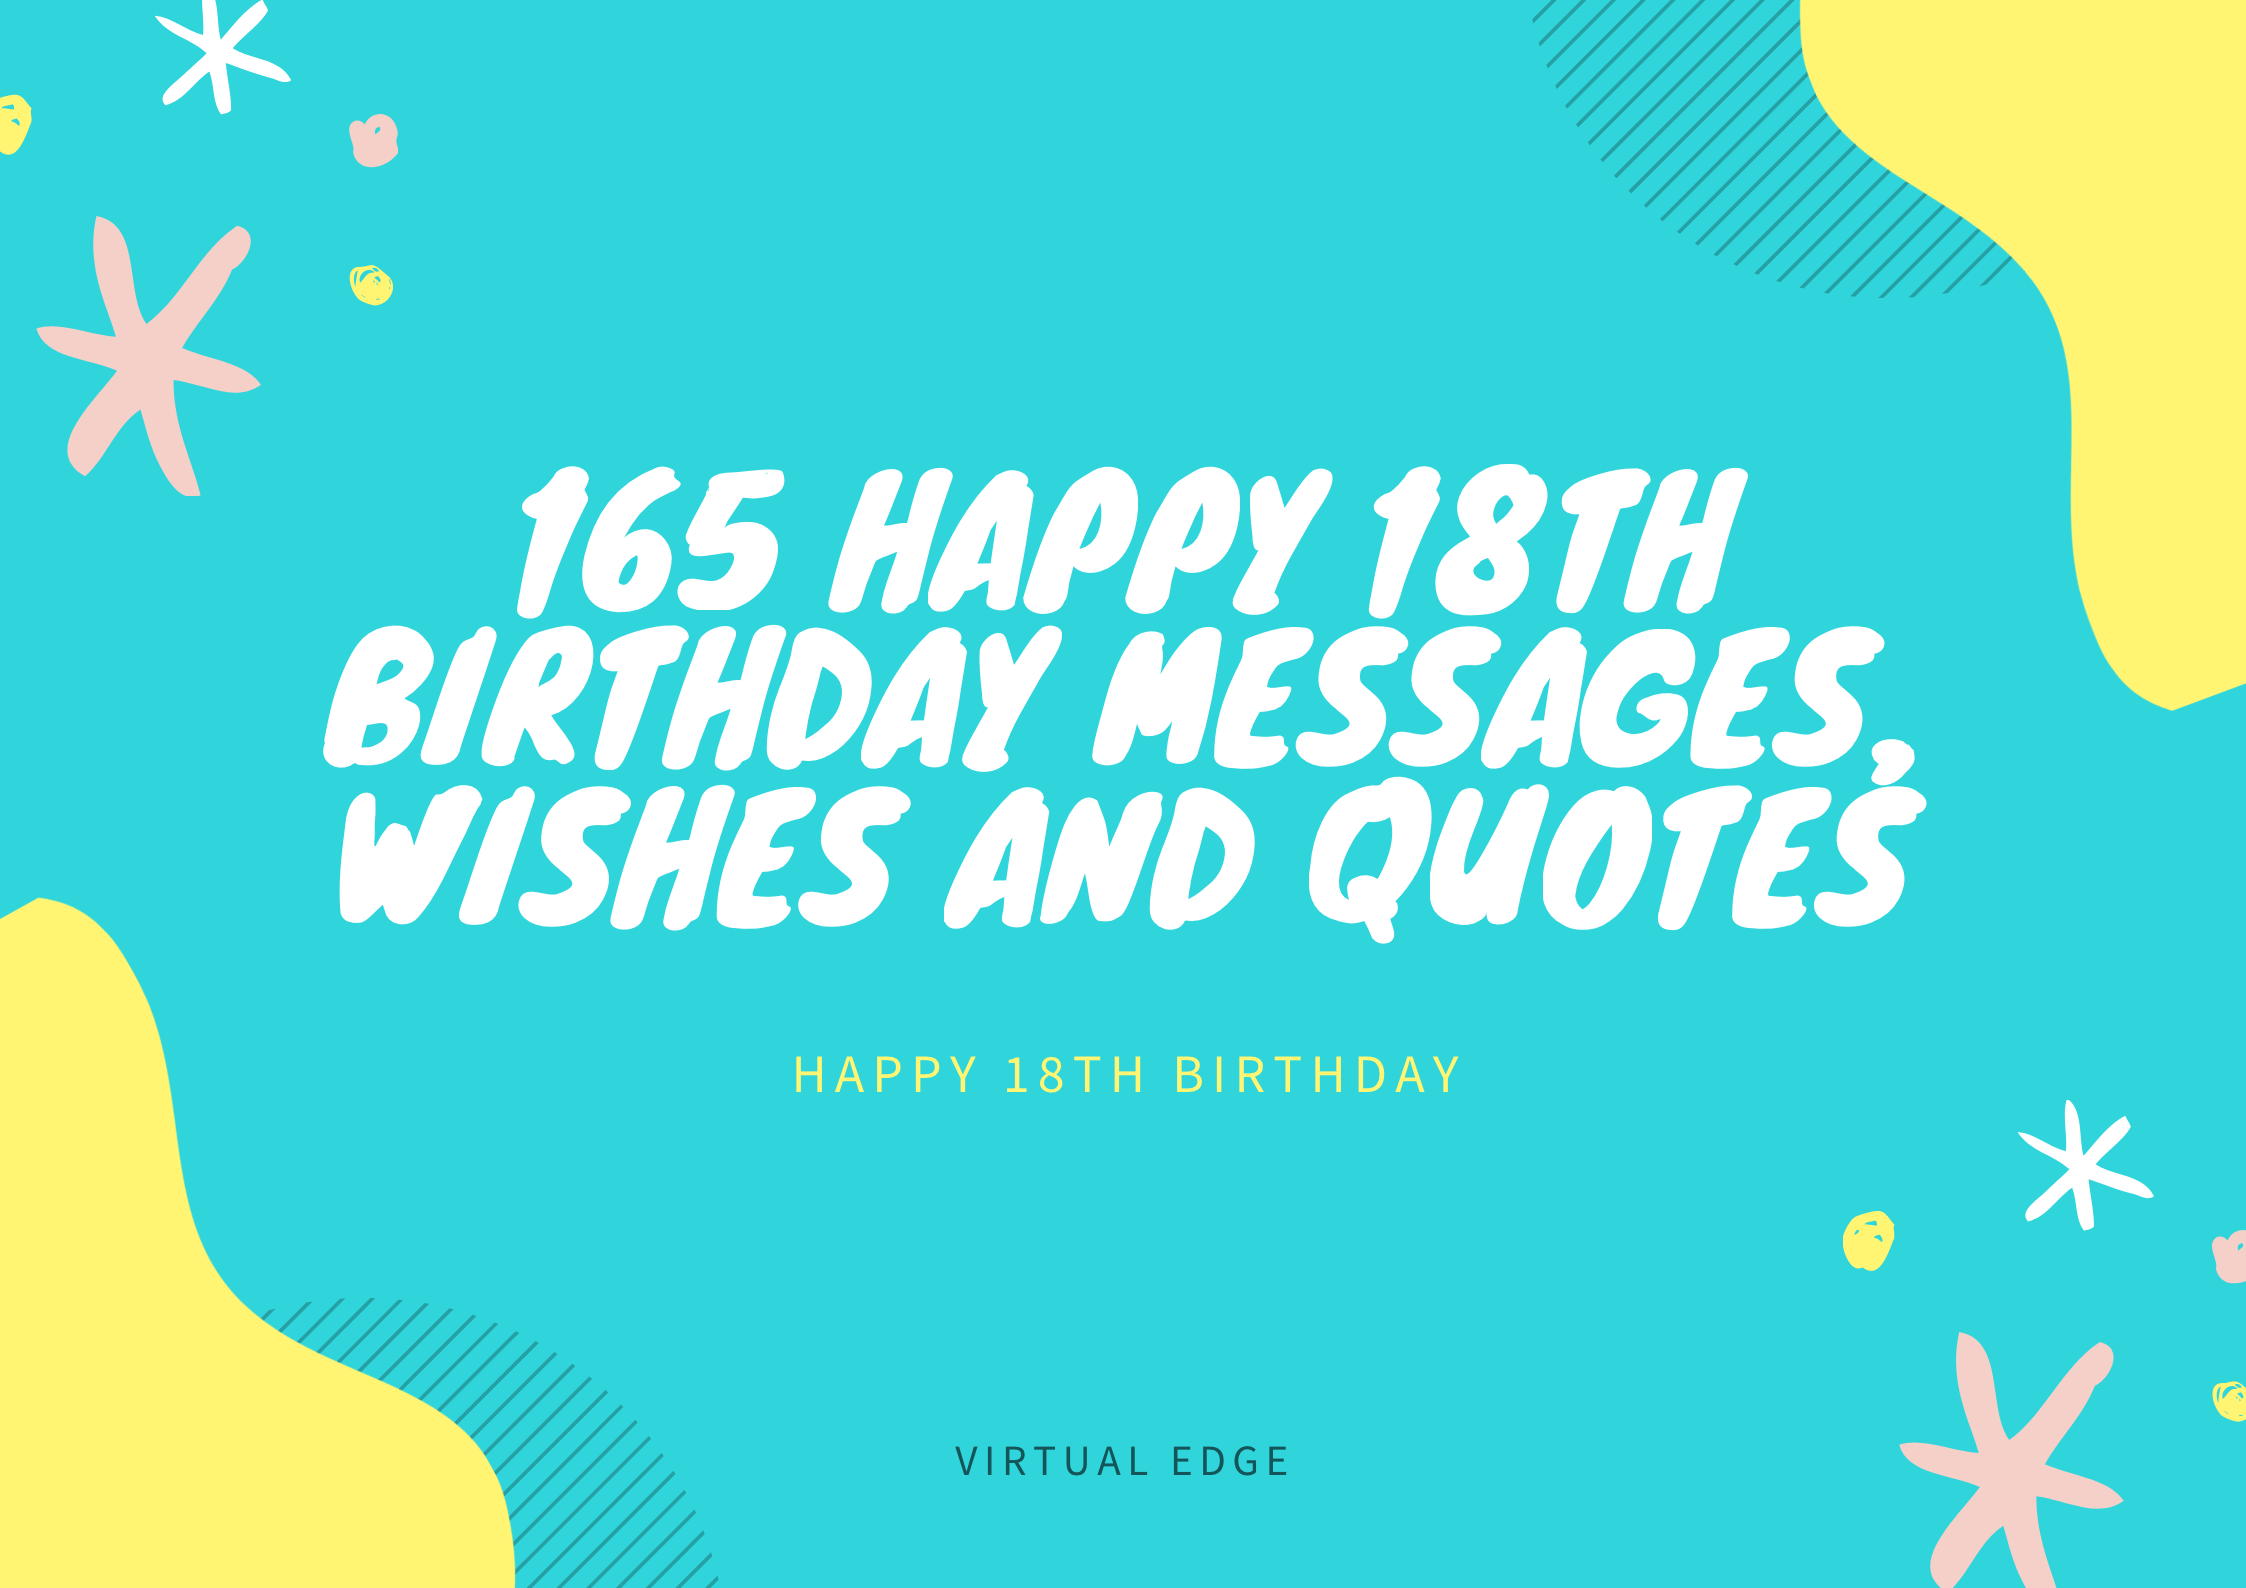 165 Happy 18th Birthday Messages, Wishes and Quotes